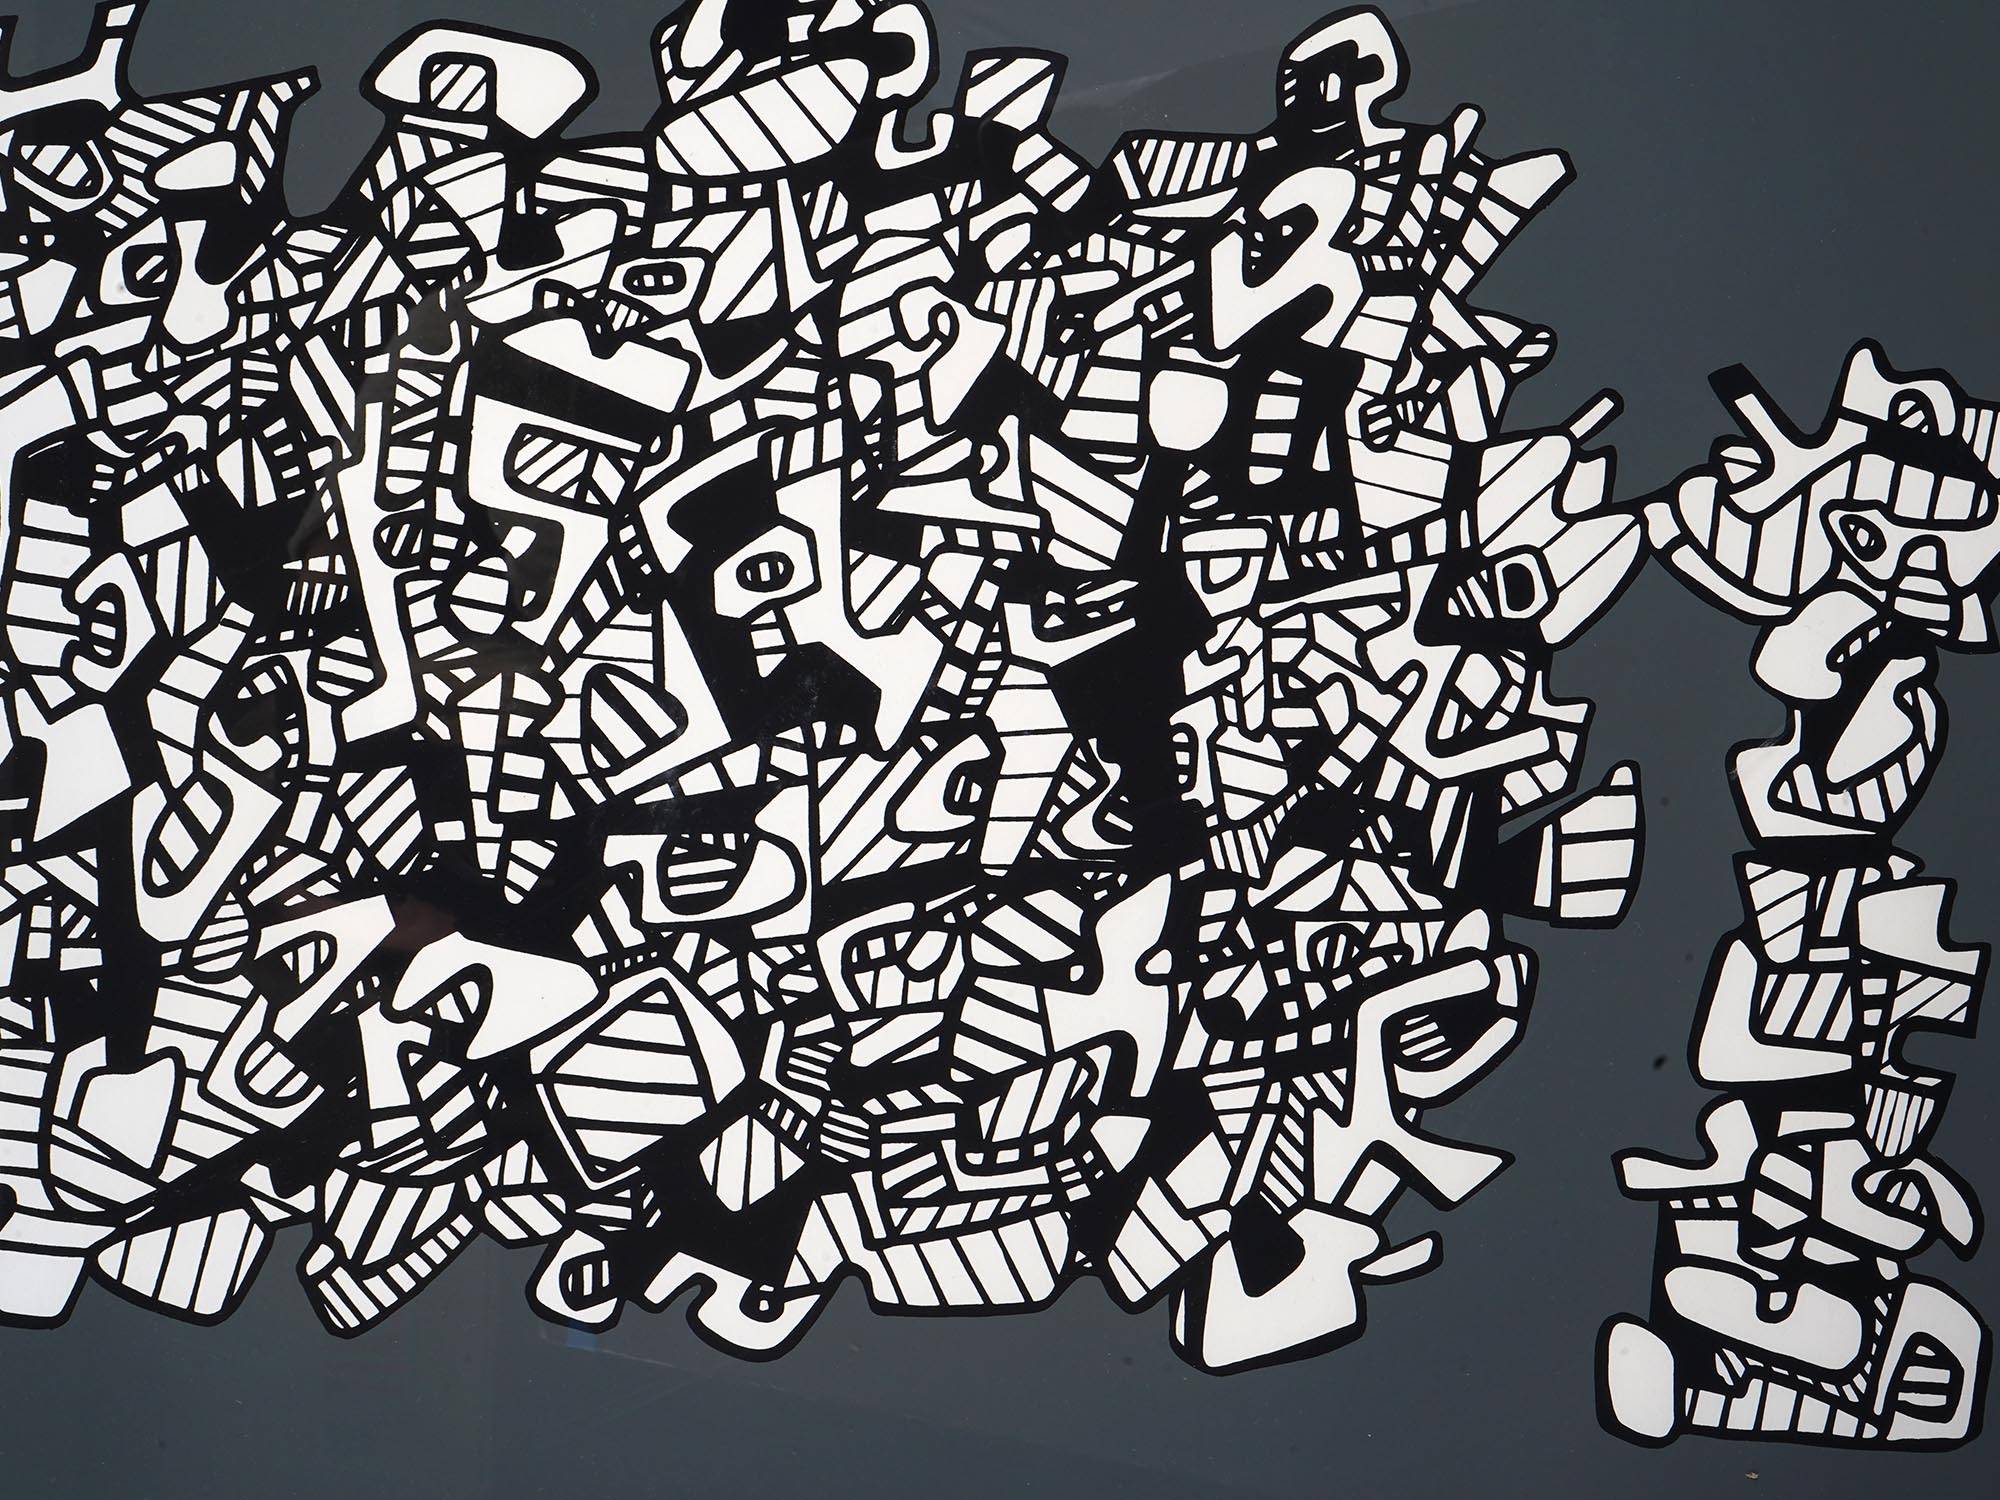 JEAN DUBUFFET 1974 FRENCH SCREENPRINT IN COLORS PIC-2